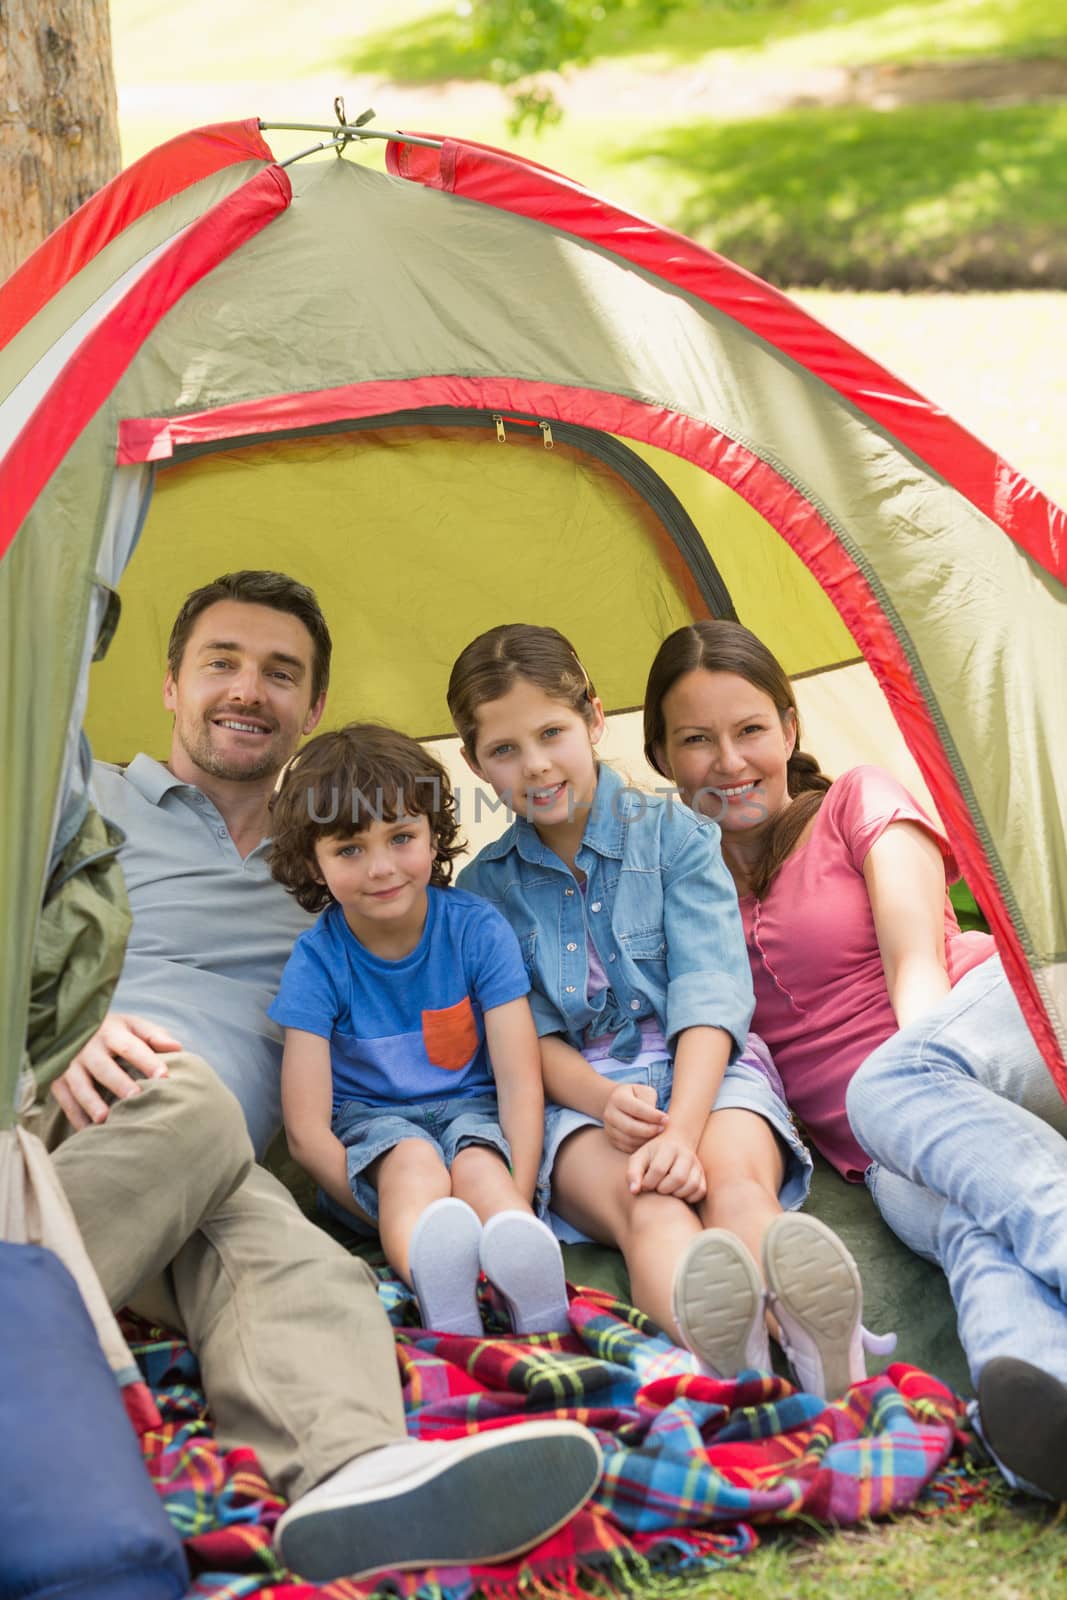 Couple with kids sitting in the tent at park by Wavebreakmedia